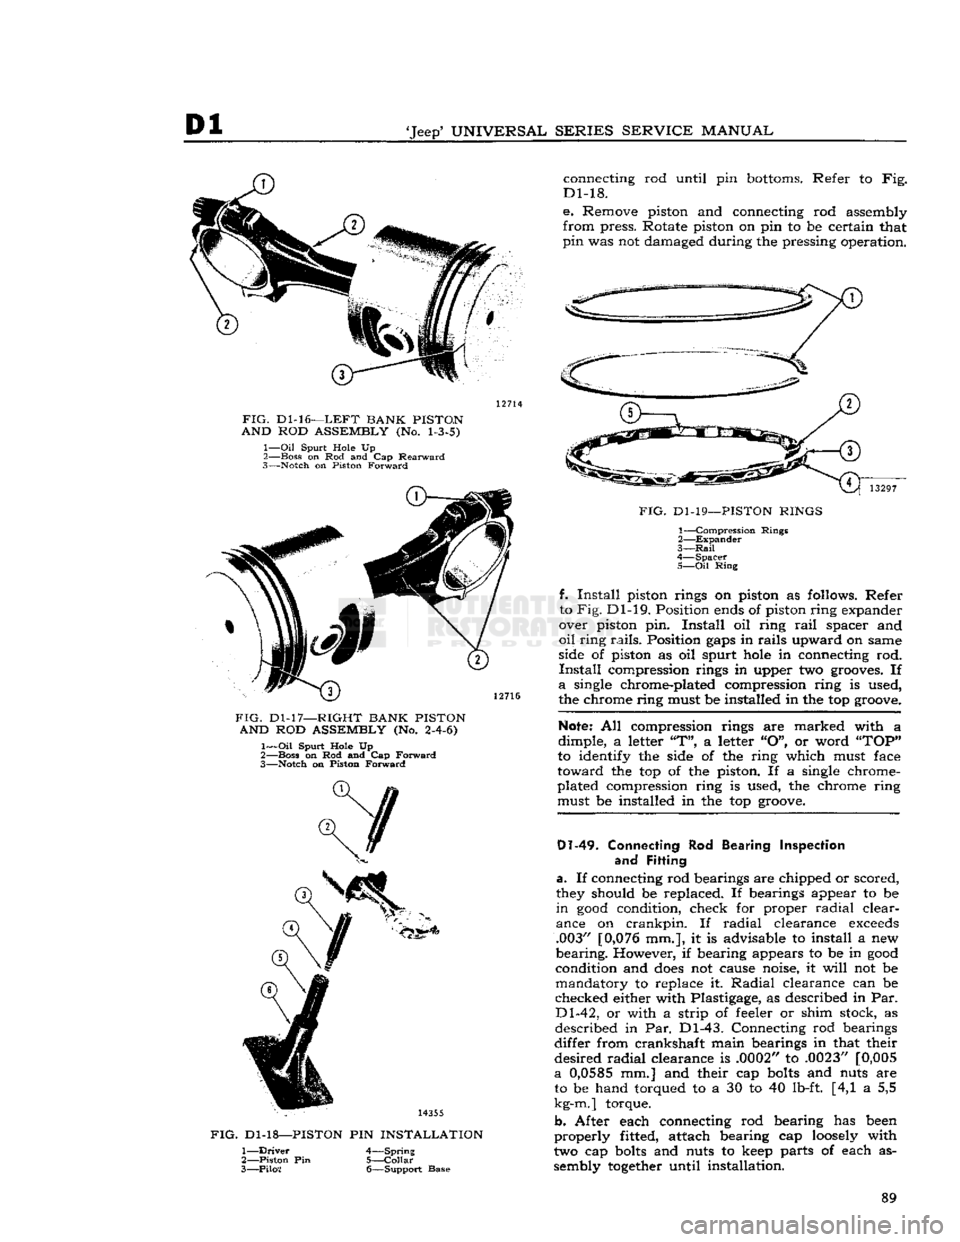 JEEP CJ 1953 Workshop Manual 
Dl 

Jeep5
 UNIVERSAL
 SERIES
 SERVICE
 MANUAL 

FIG.
 Dl-16—LEFT
 BANK
 PISTON 

AND
 ROD
 ASSEMBLY
 (No.
 1-3-5) 

1—
 Oil
 Spurt Hole Up 
2— Boss on Rod and Cap
 Rearward 

3—
 Notch on P